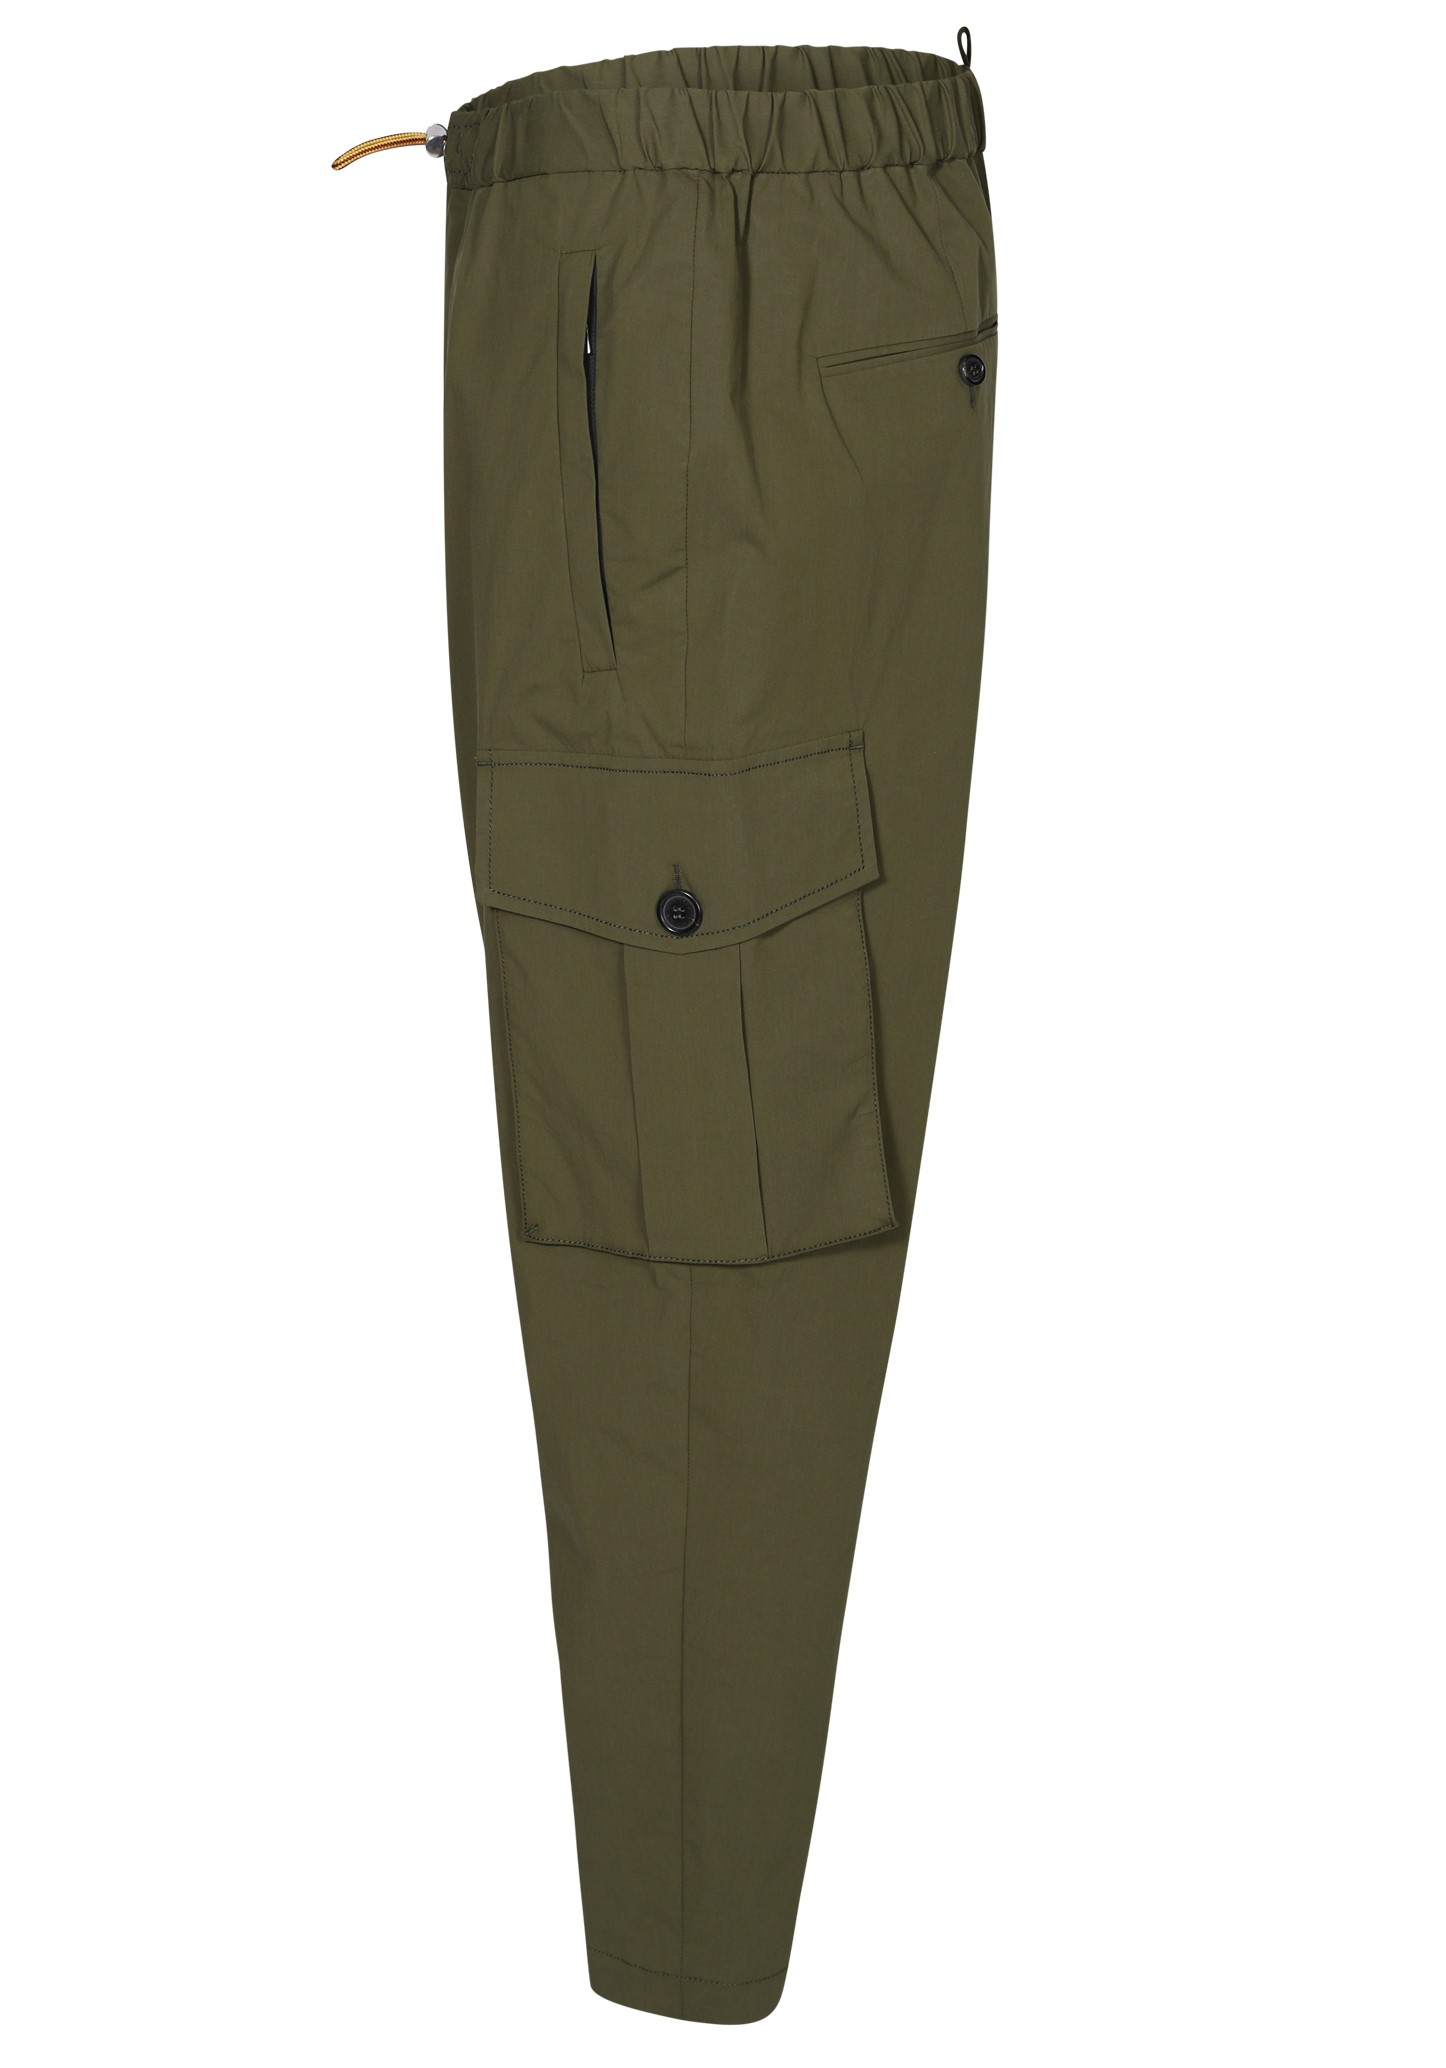 DSQUARED2 Pully Cargo Pant in Olive